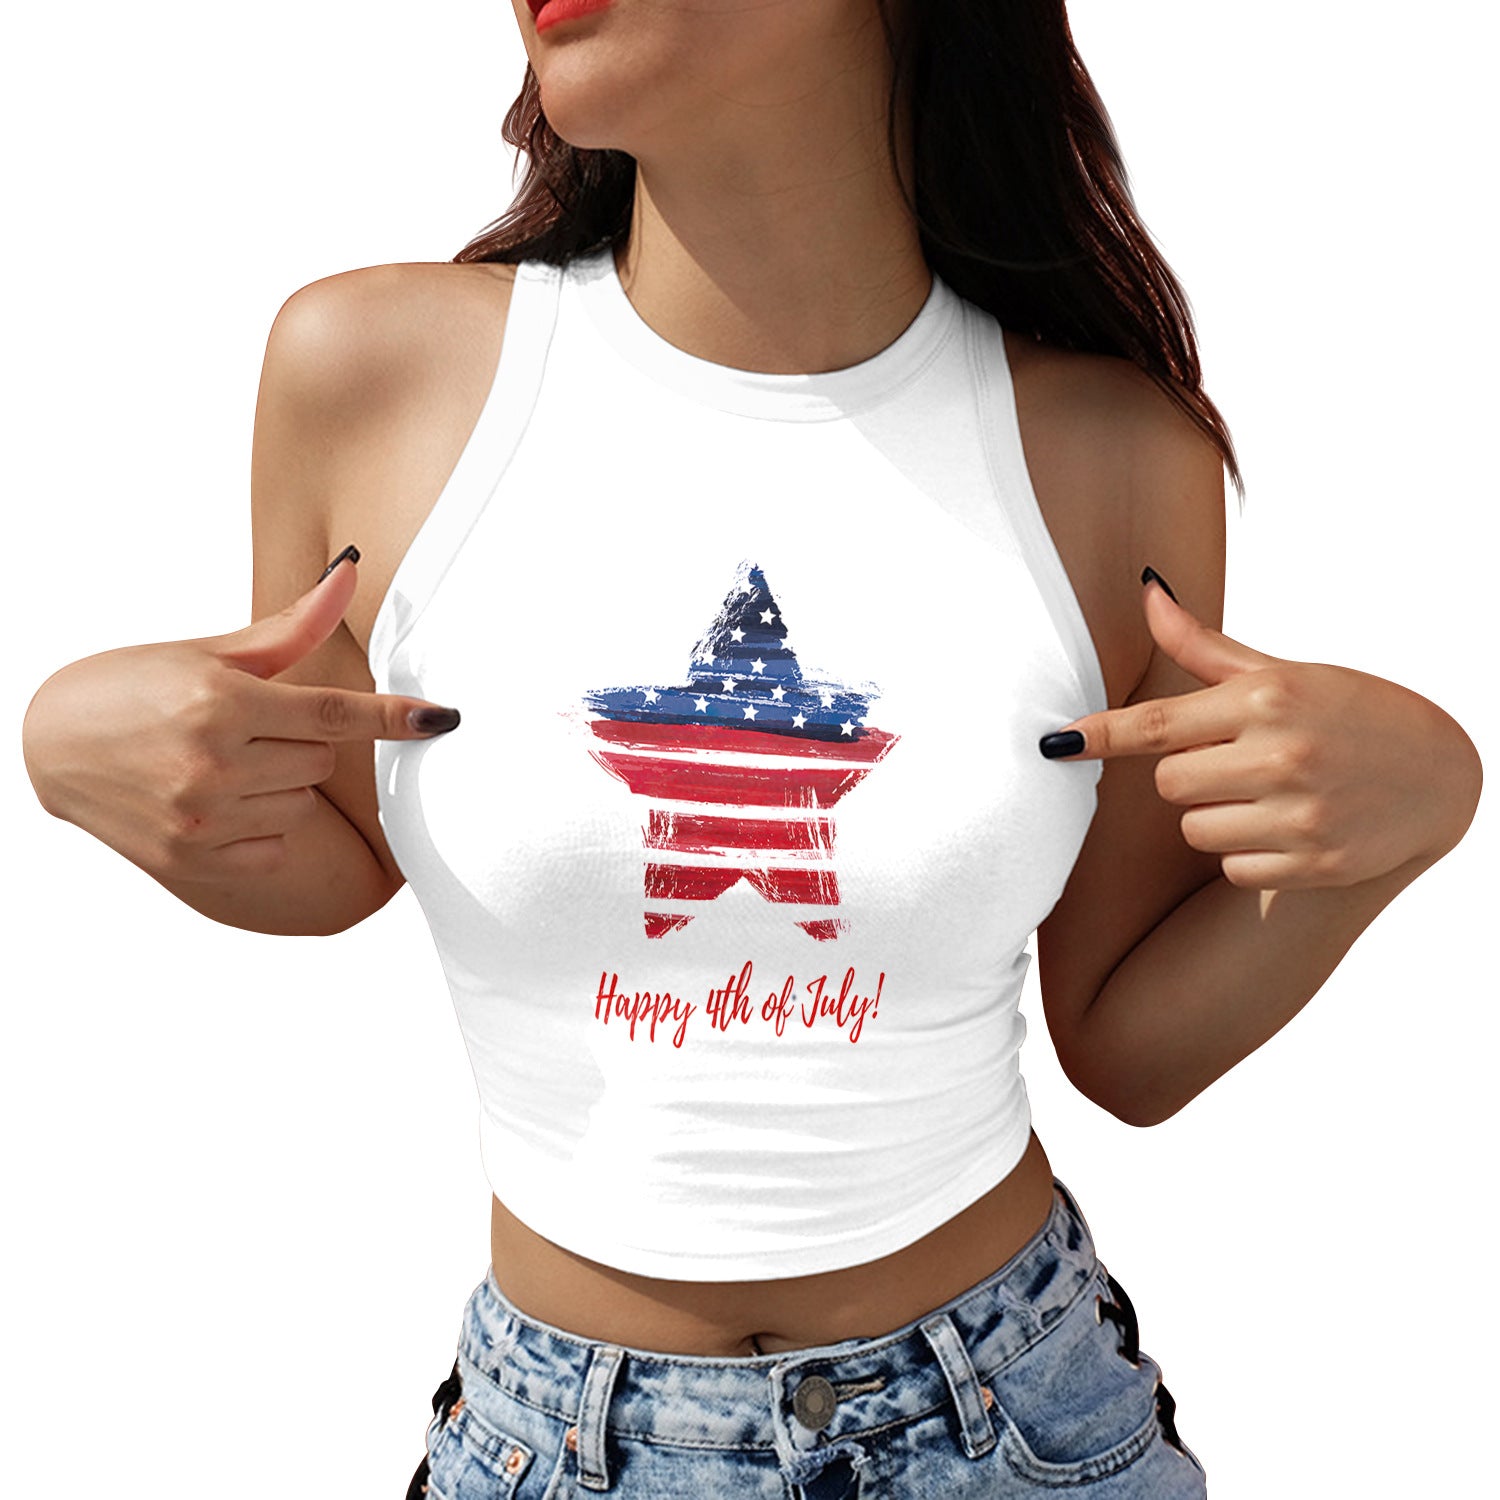 Women's Summer Tight Independence Day National Flag Tops